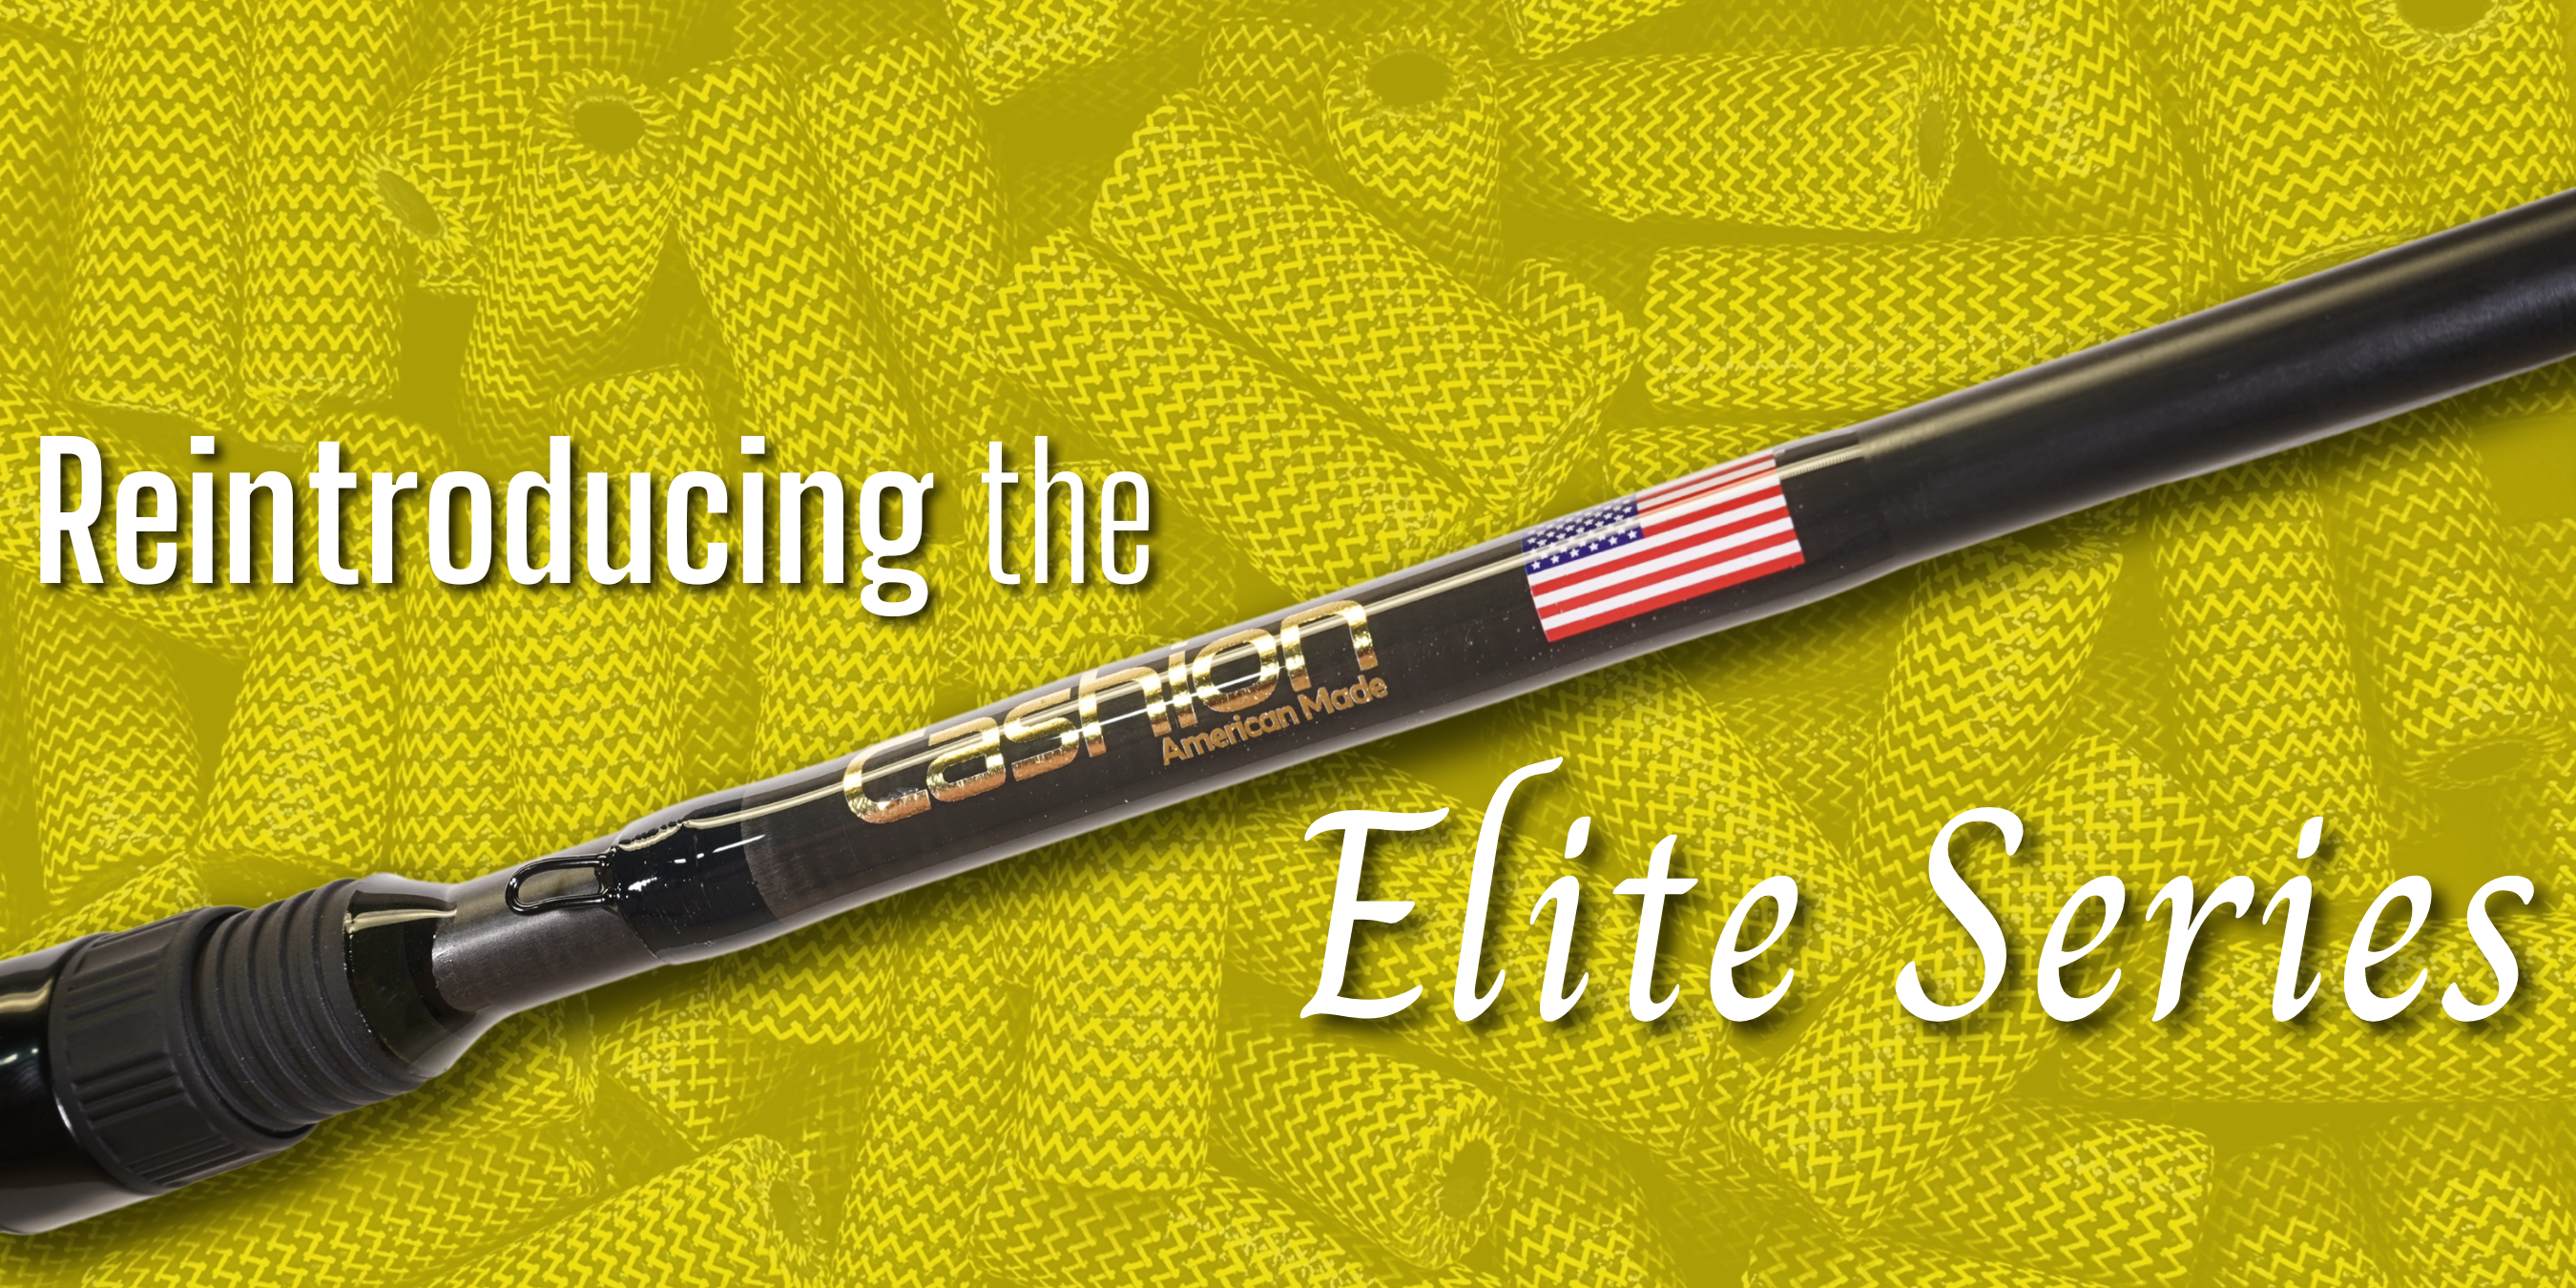 Fishing Rods Made in the USA